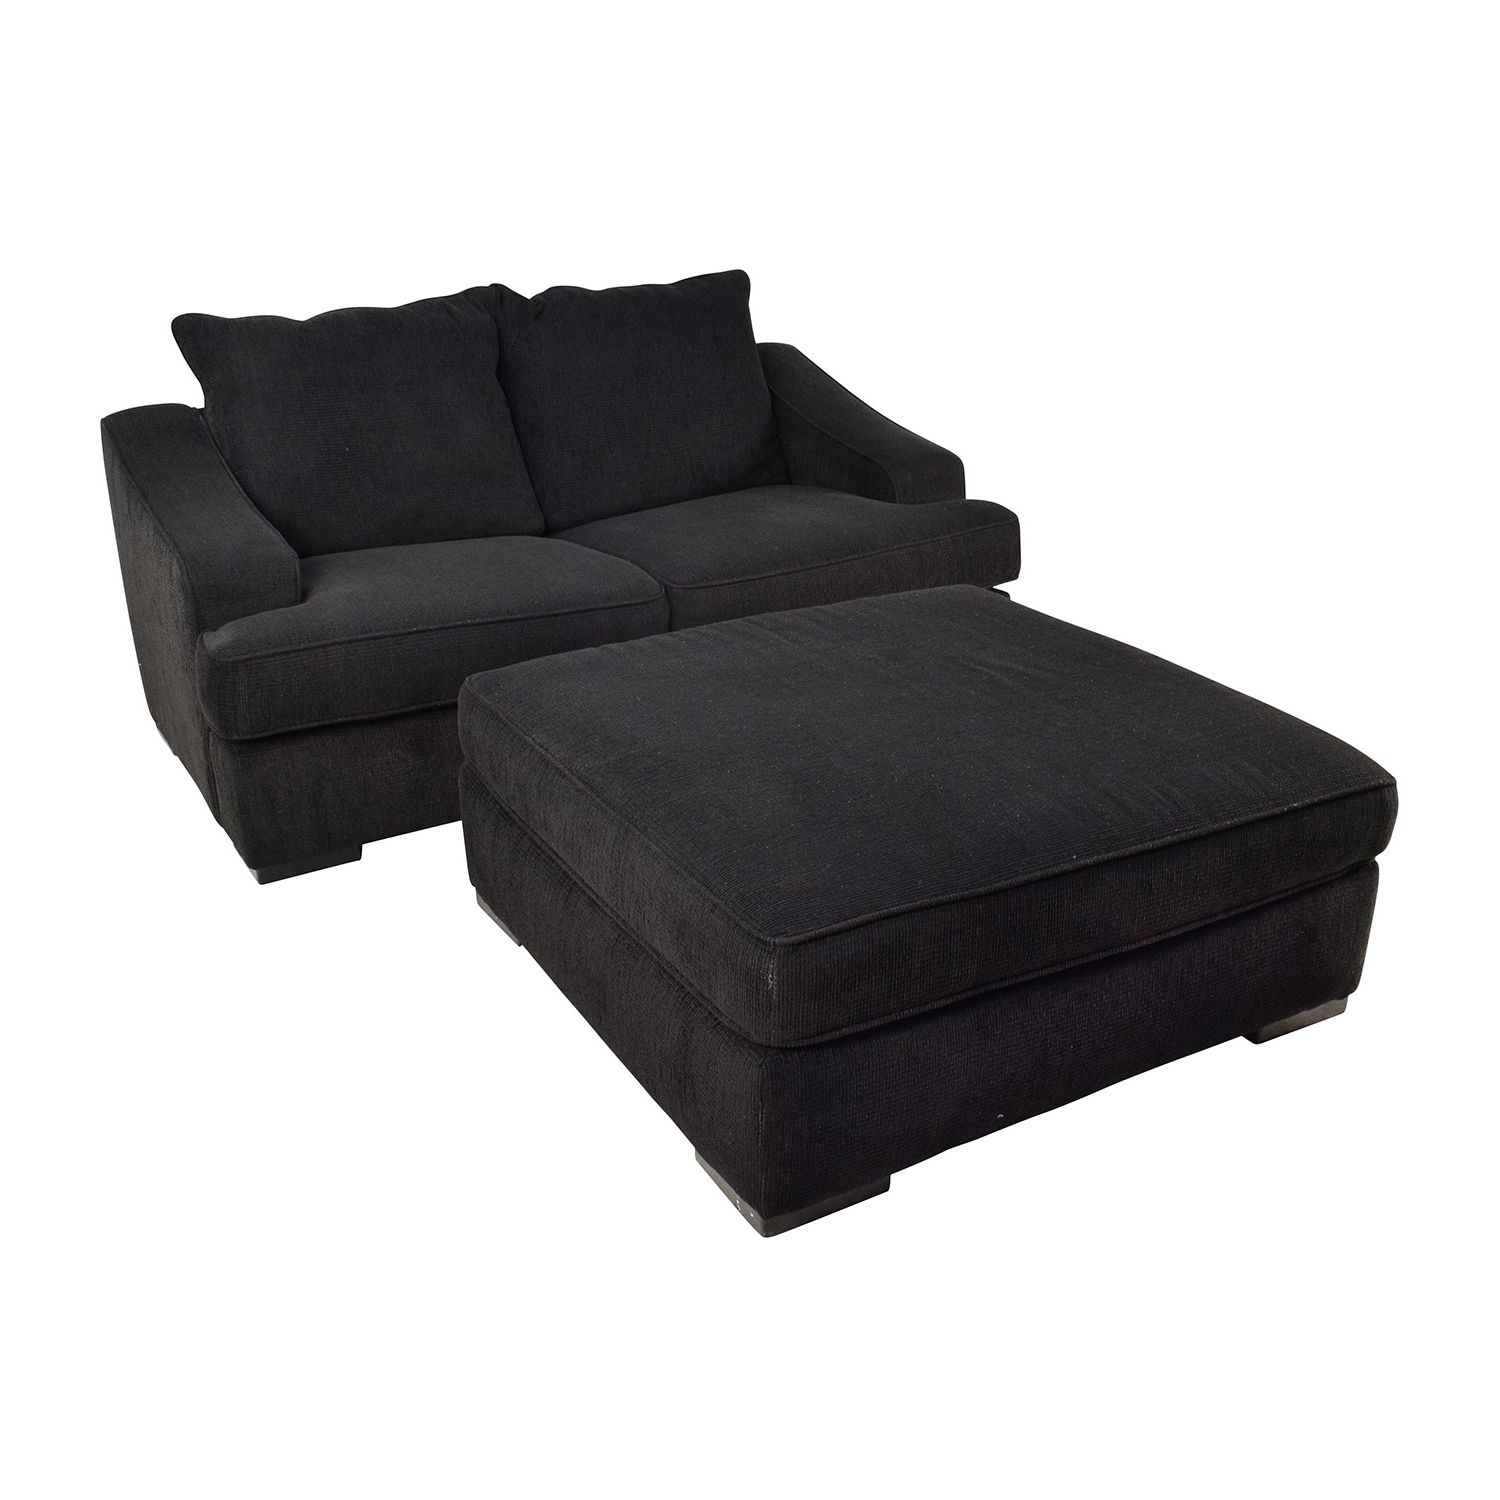 [%67% Off – Black Cloth Loveseat And Matching Oversized Ottoman / Sofas Inside Latest Loveseats With Ottoman|Loveseats With Ottoman Within Popular 67% Off – Black Cloth Loveseat And Matching Oversized Ottoman / Sofas|Most Recent Loveseats With Ottoman Regarding 67% Off – Black Cloth Loveseat And Matching Oversized Ottoman / Sofas|Most Current 67% Off – Black Cloth Loveseat And Matching Oversized Ottoman / Sofas In Loveseats With Ottoman%] (View 3 of 15)